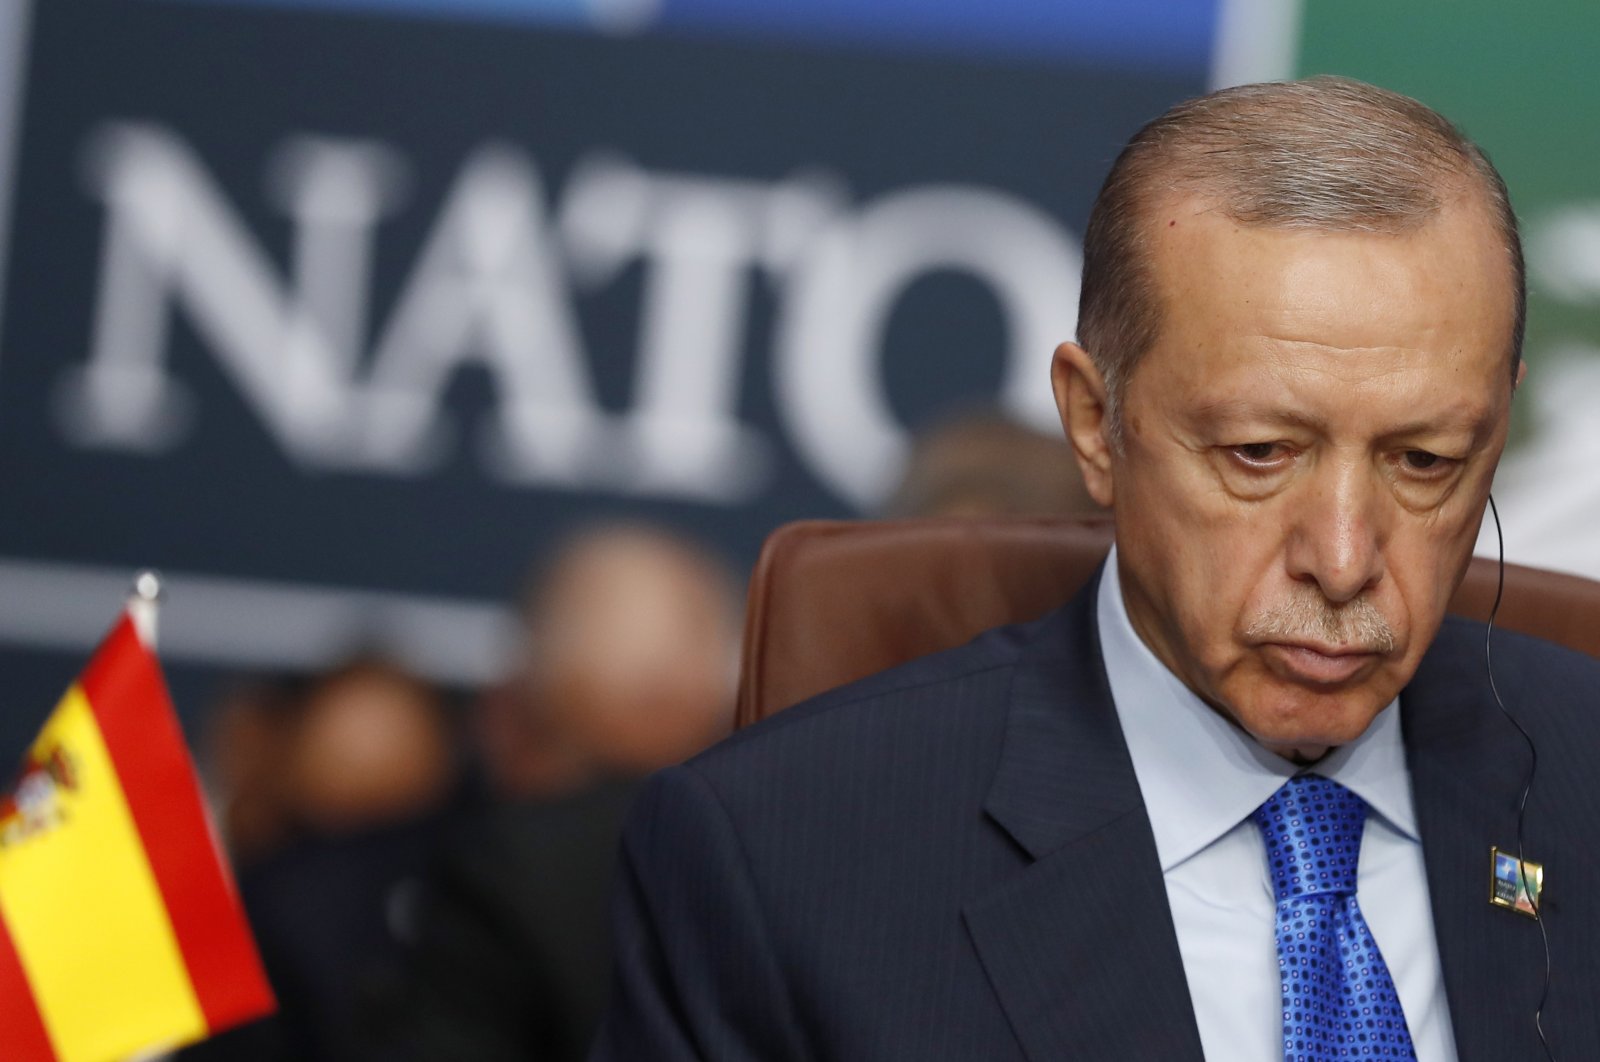 President Recep Tayyip Erdoğan waits for the start of a round table meeting of the North Atlantic Council during a NATO summit in Vilnius, Lithuania, July 11, 2023. (AP Photo)